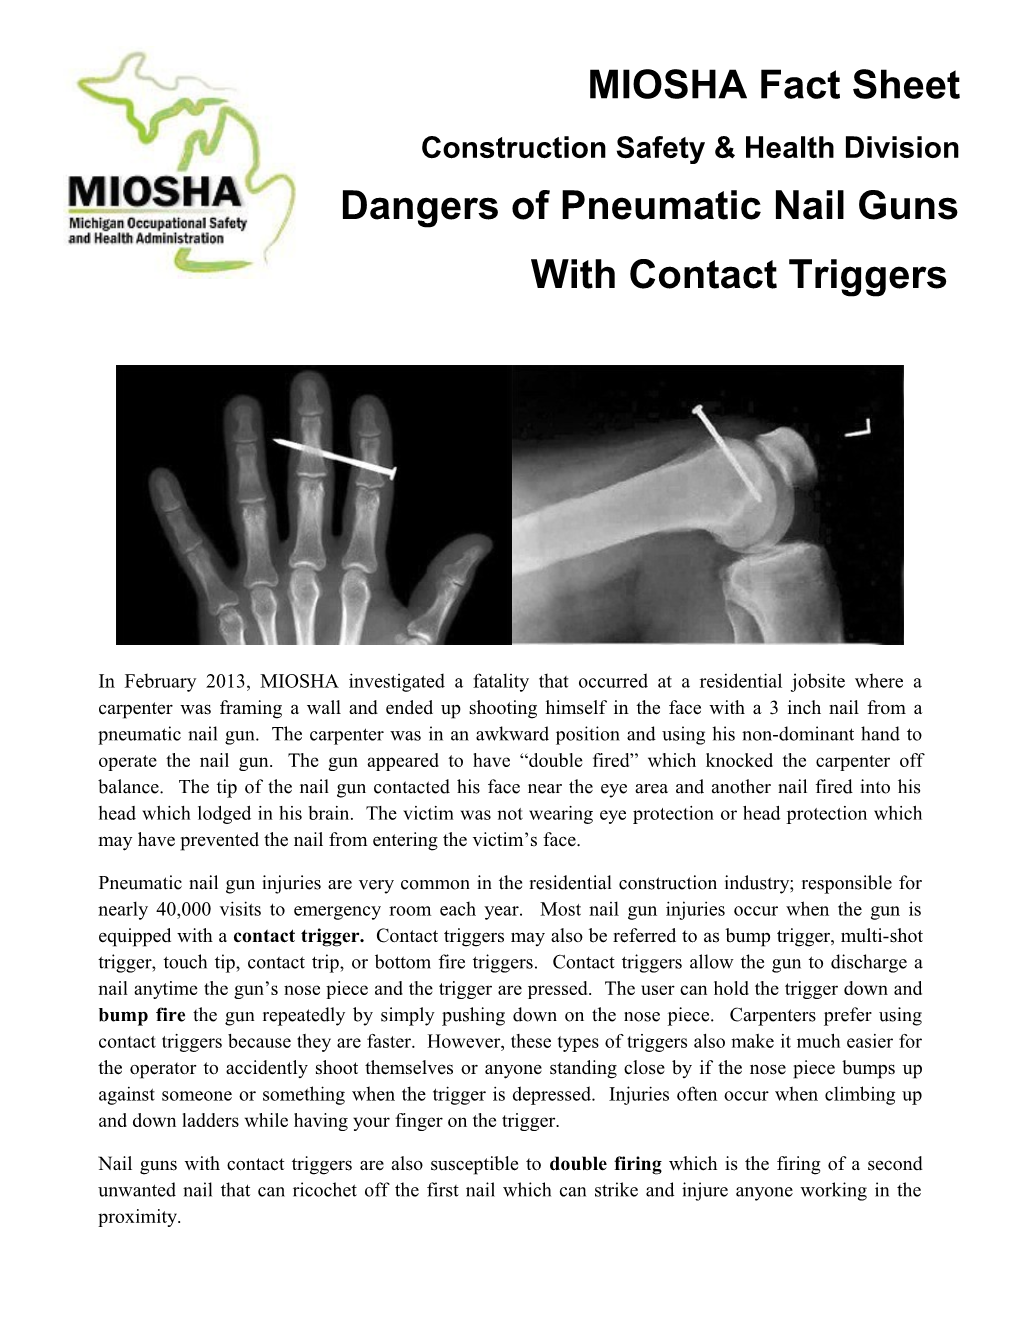 Dangers of Pneumatic Nail Guns with Contact Triggers